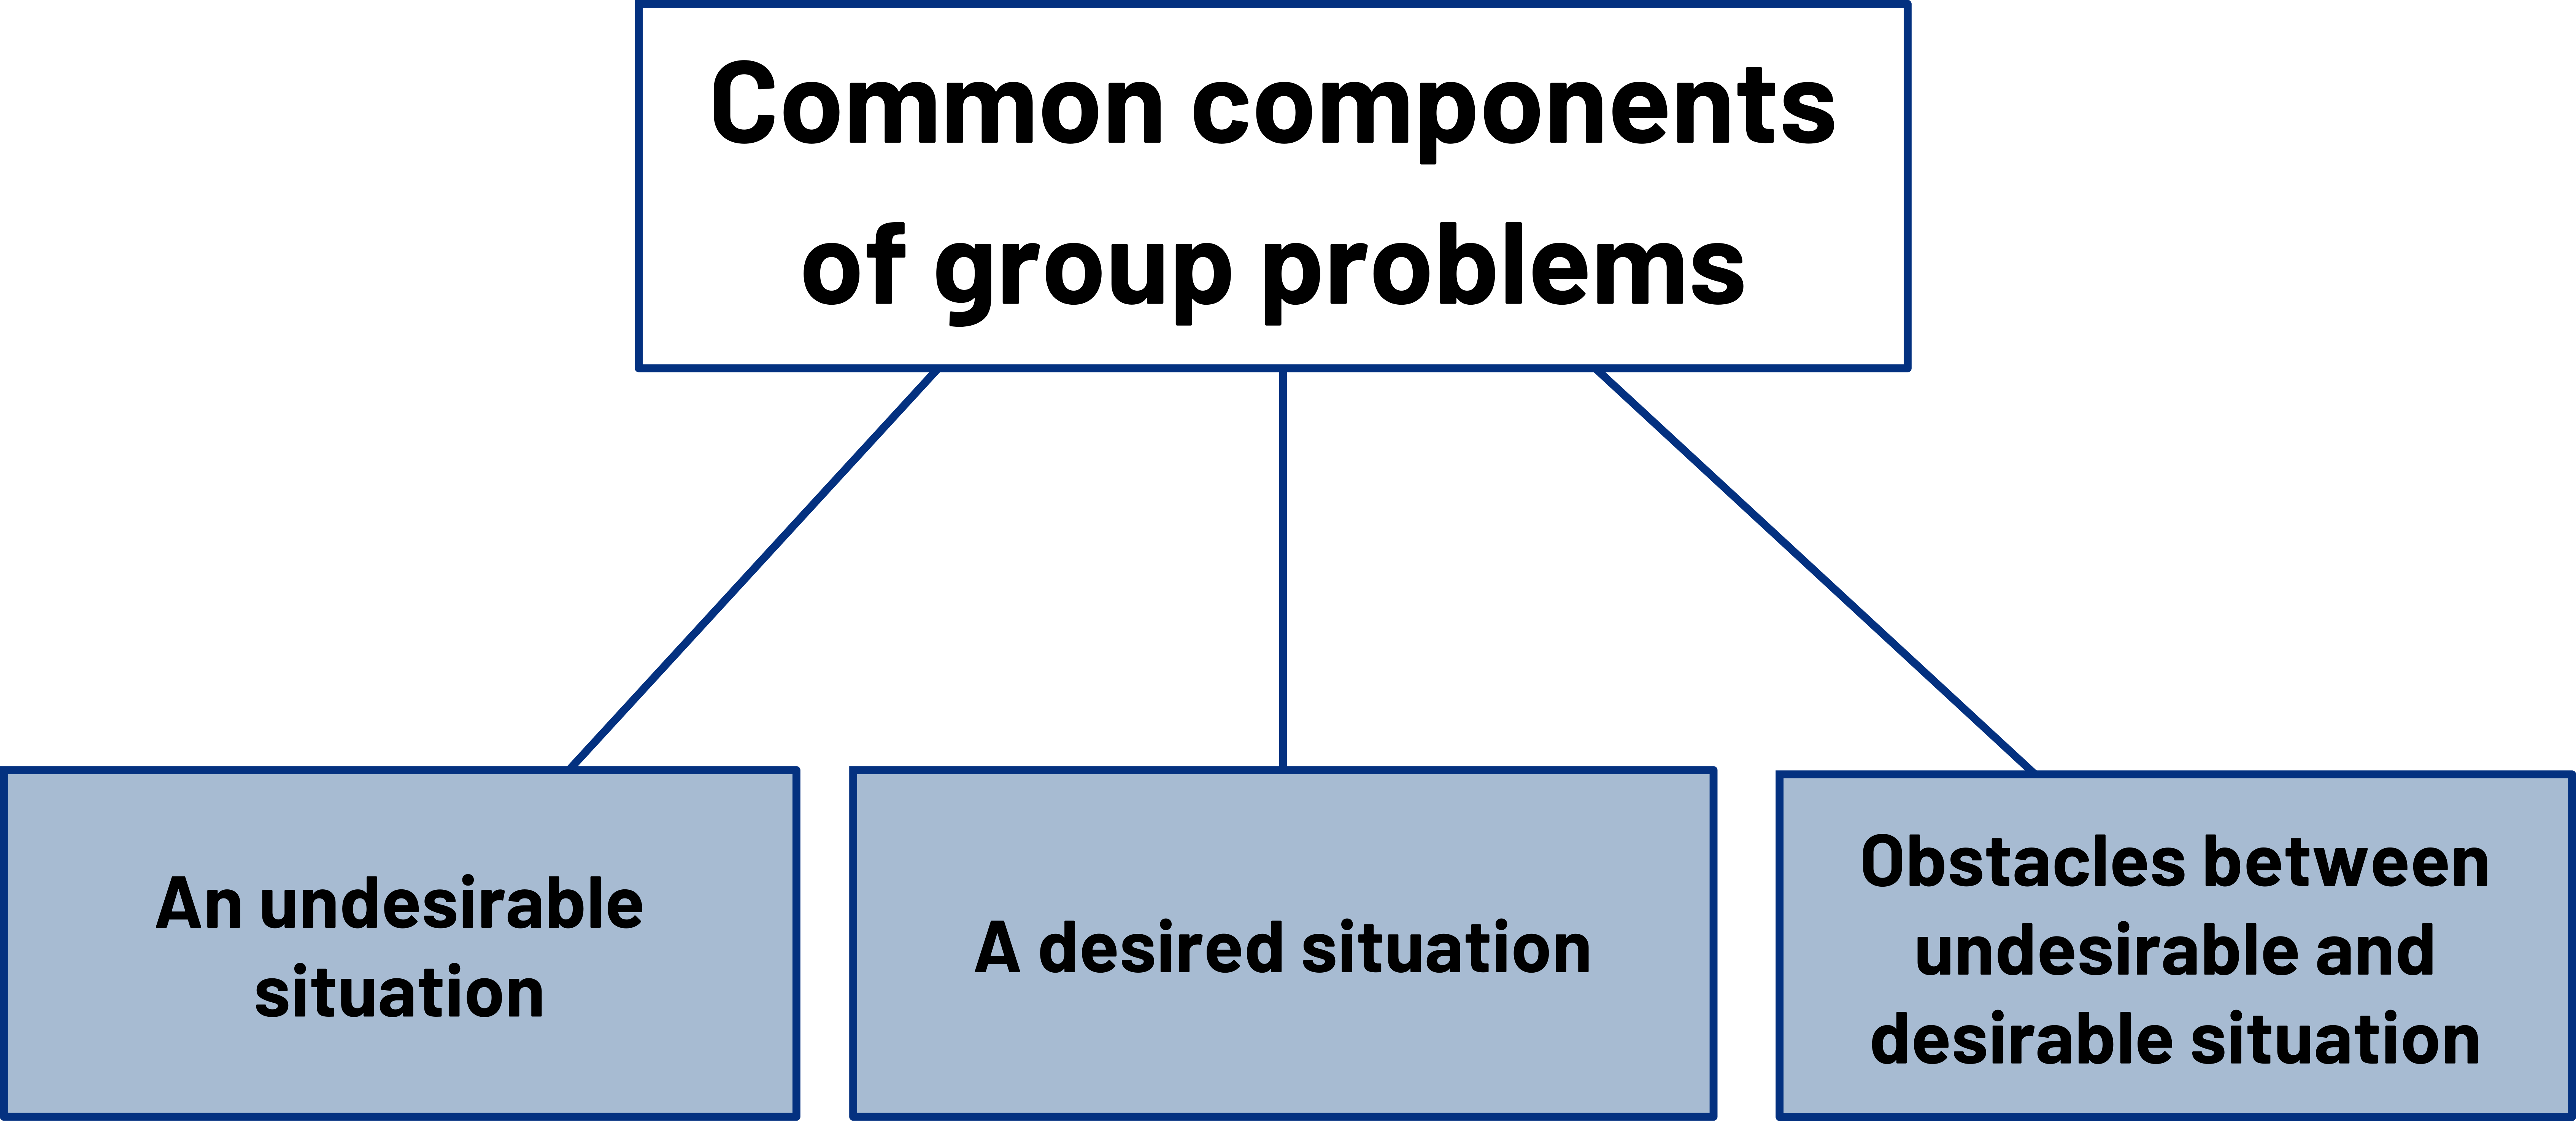 Common components of group problems: an undesirable situation, a desired situation, obstacles between undesirable and desirable situation.